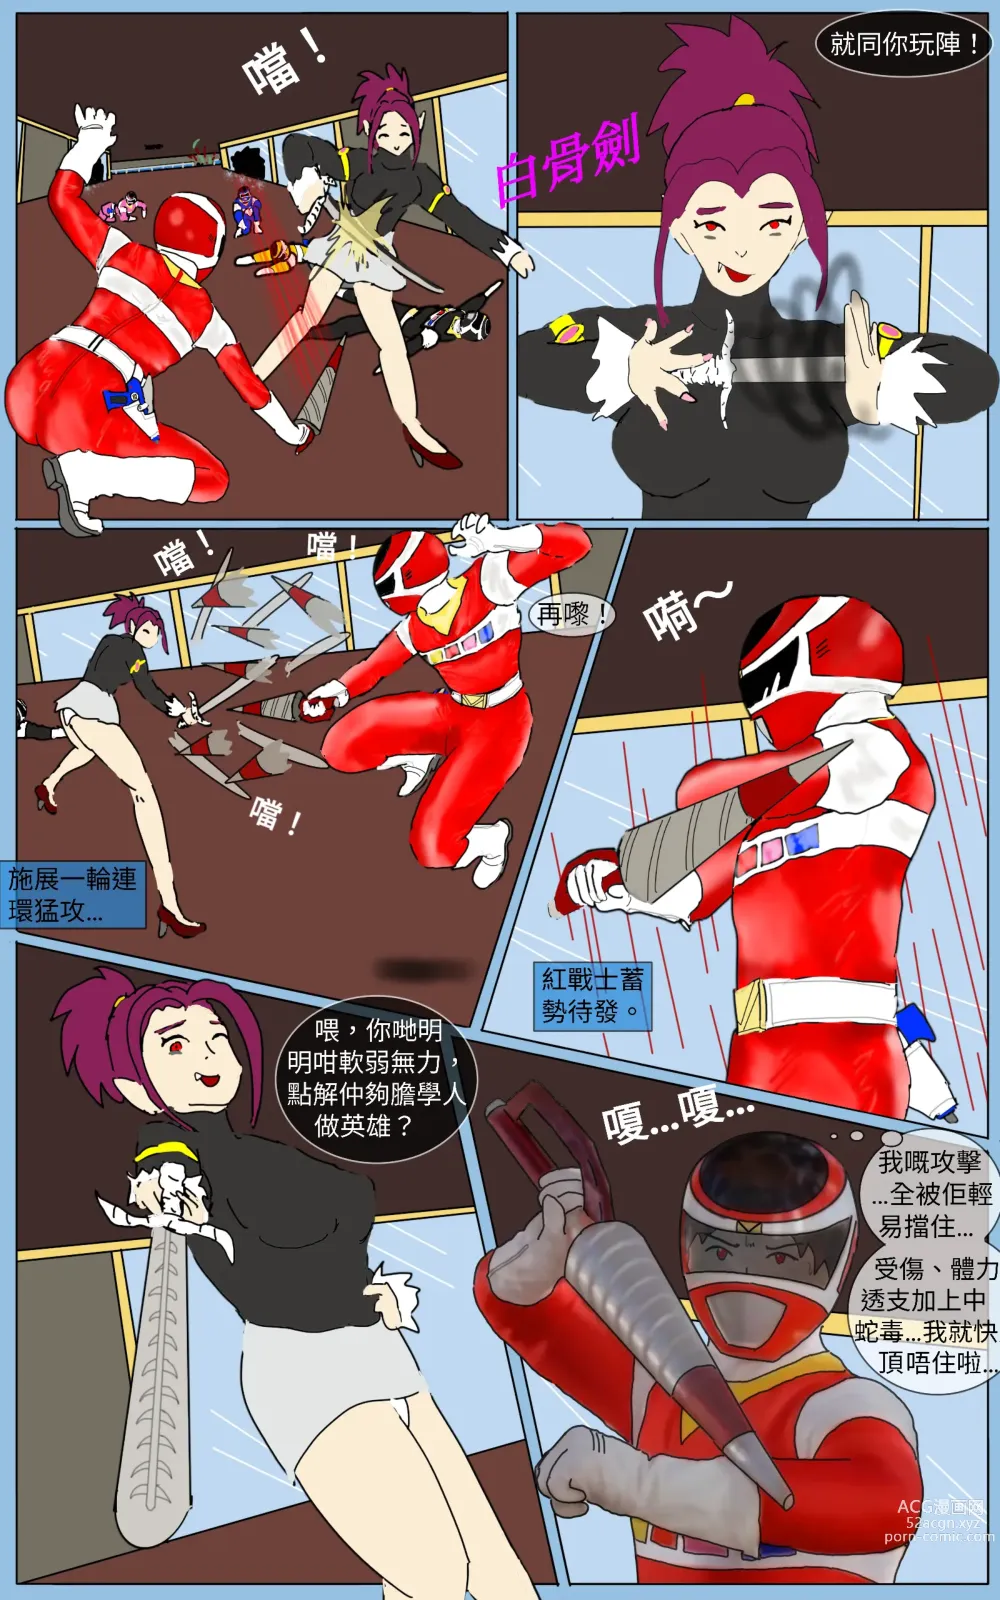 Page 20 of doujinshi Mission 38